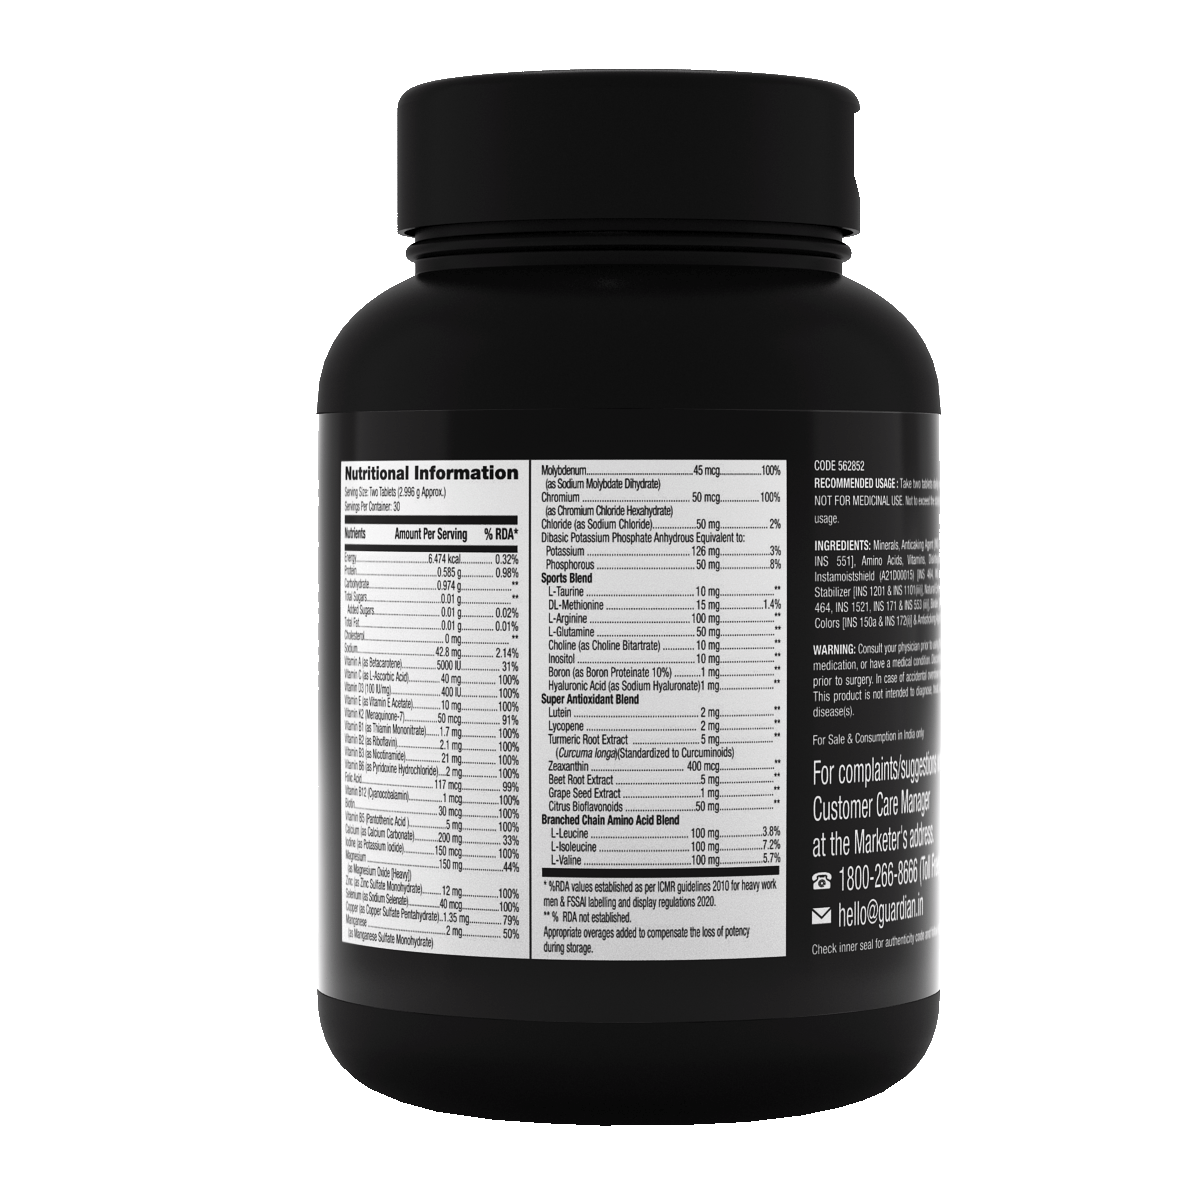 Muscle Force Stack For Fueling Muscle Growth - 6 in 1 Muscle Stack | Maintains Healthy Cholesterol |Improves Joint Health | Builds & Repairs Muscles